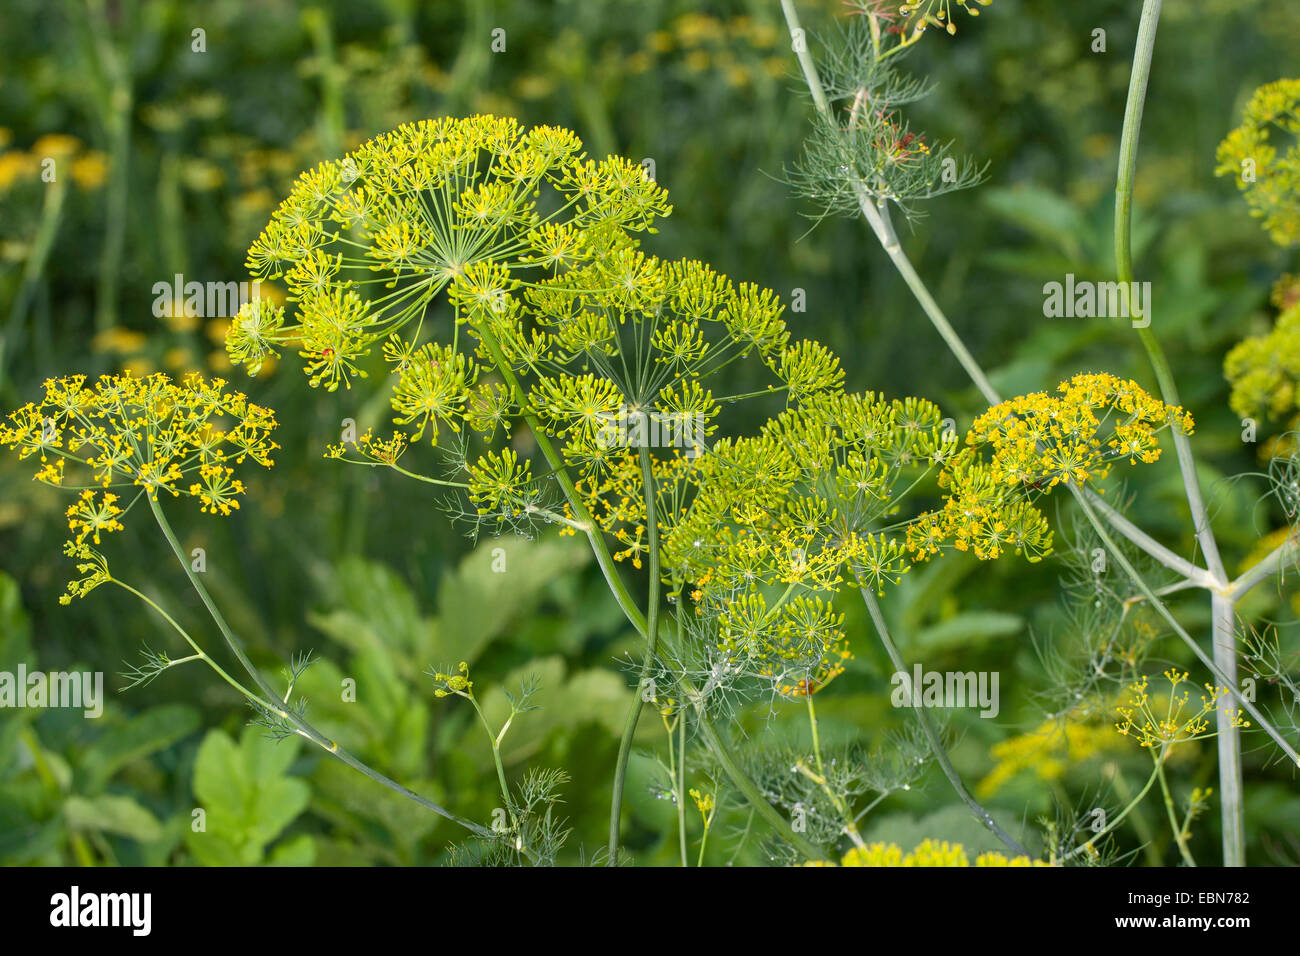 Dill, Aneth (Anethum graveolens), blooming Stock Photo